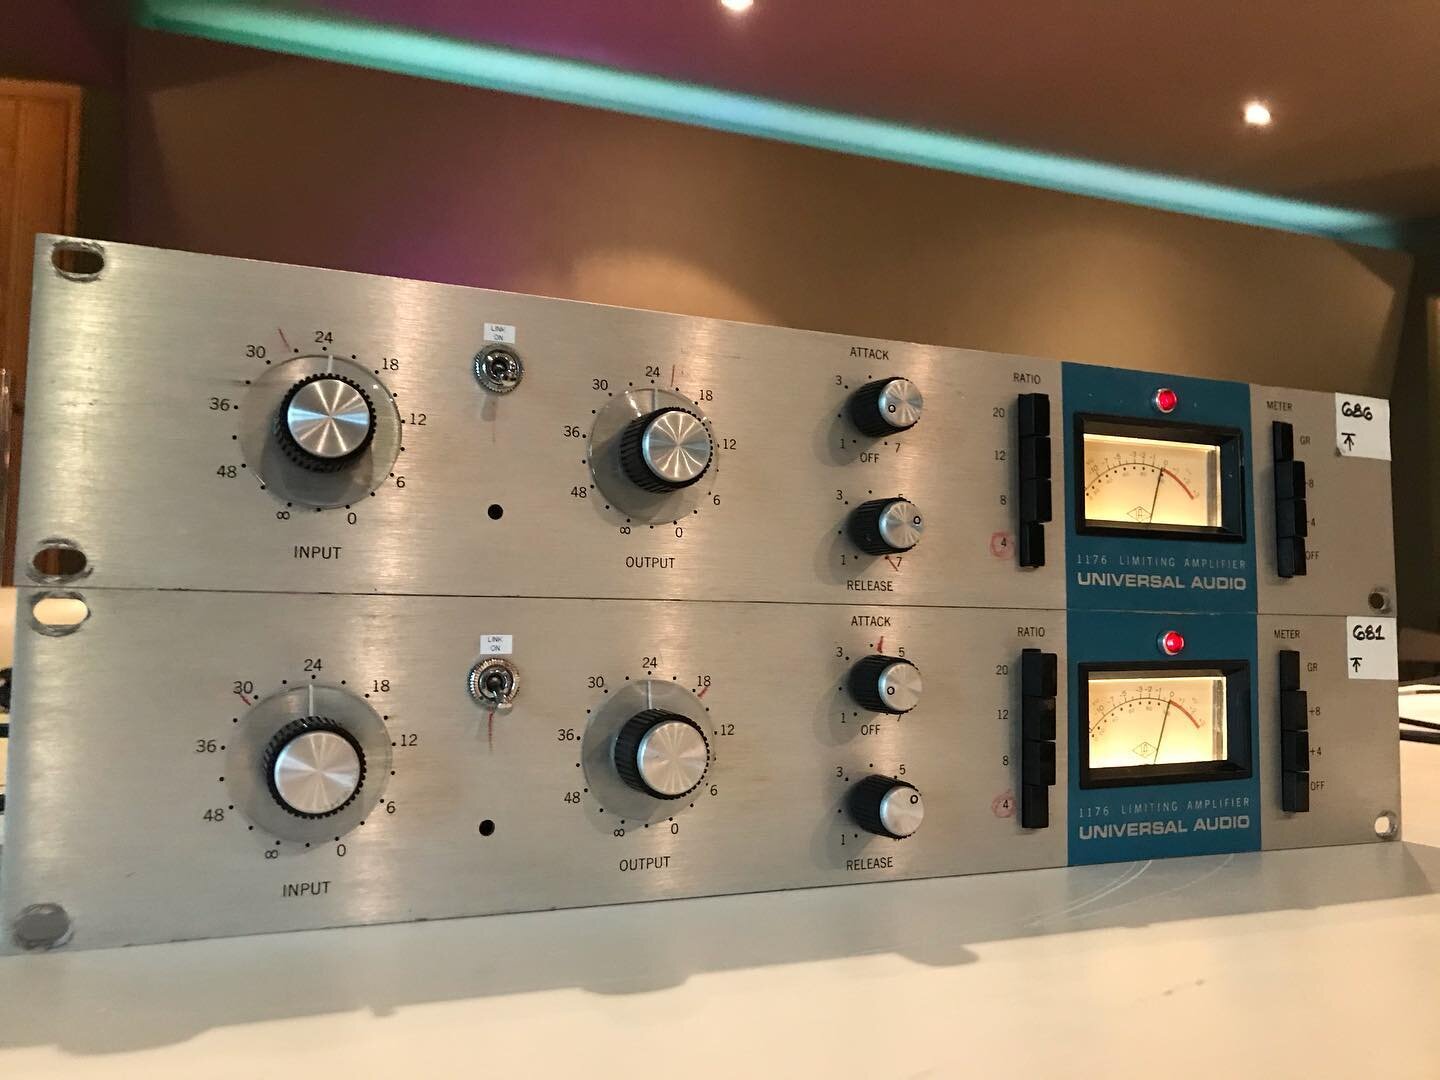 We finally have our vintage Universal Audio Bluestripe 1176 compressors back and sounding better than ever!
The original Bluestripes are the edgiest versions, with plenty of distortion to provide a distinct colour to any signal.
The 1176 was meant to